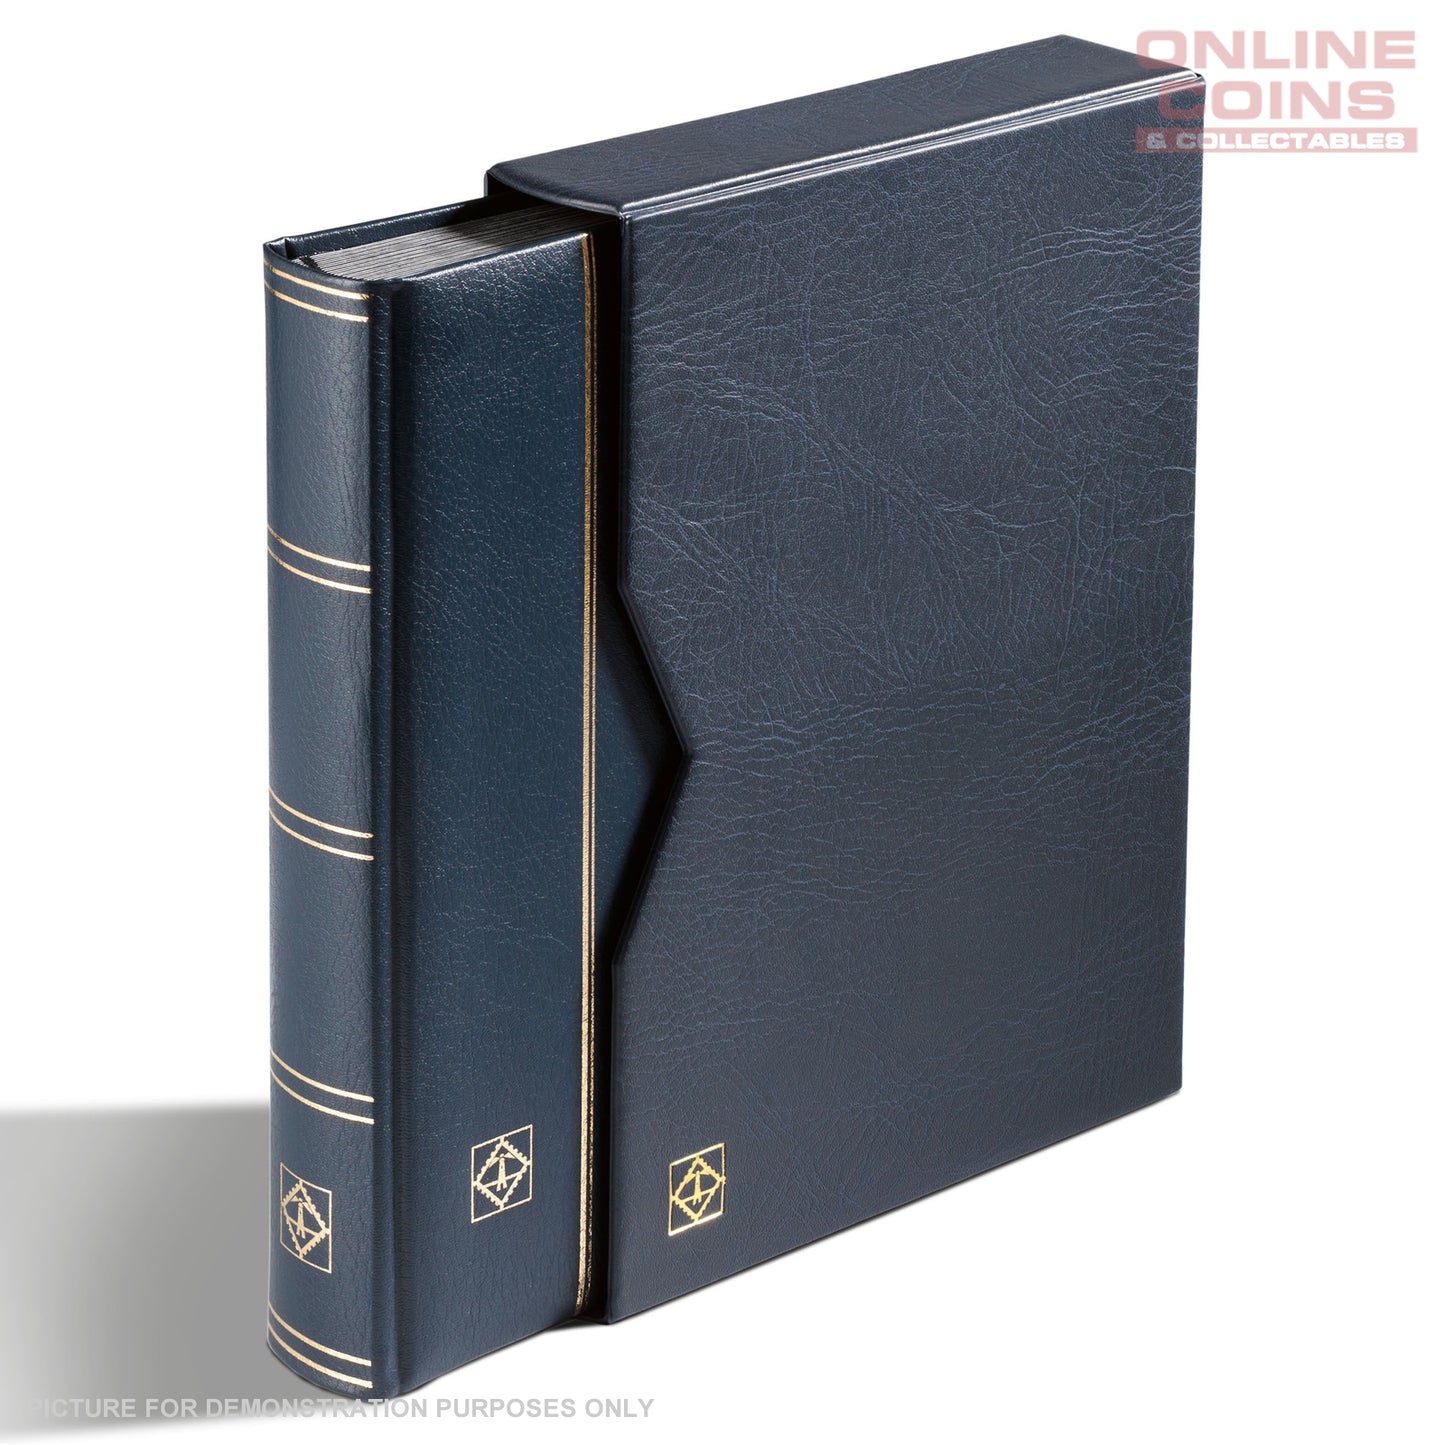 Lighthouse A4 PREMIUM Stockbook & Slipcase 32 Pages - Padded Leather Cover - BLUE